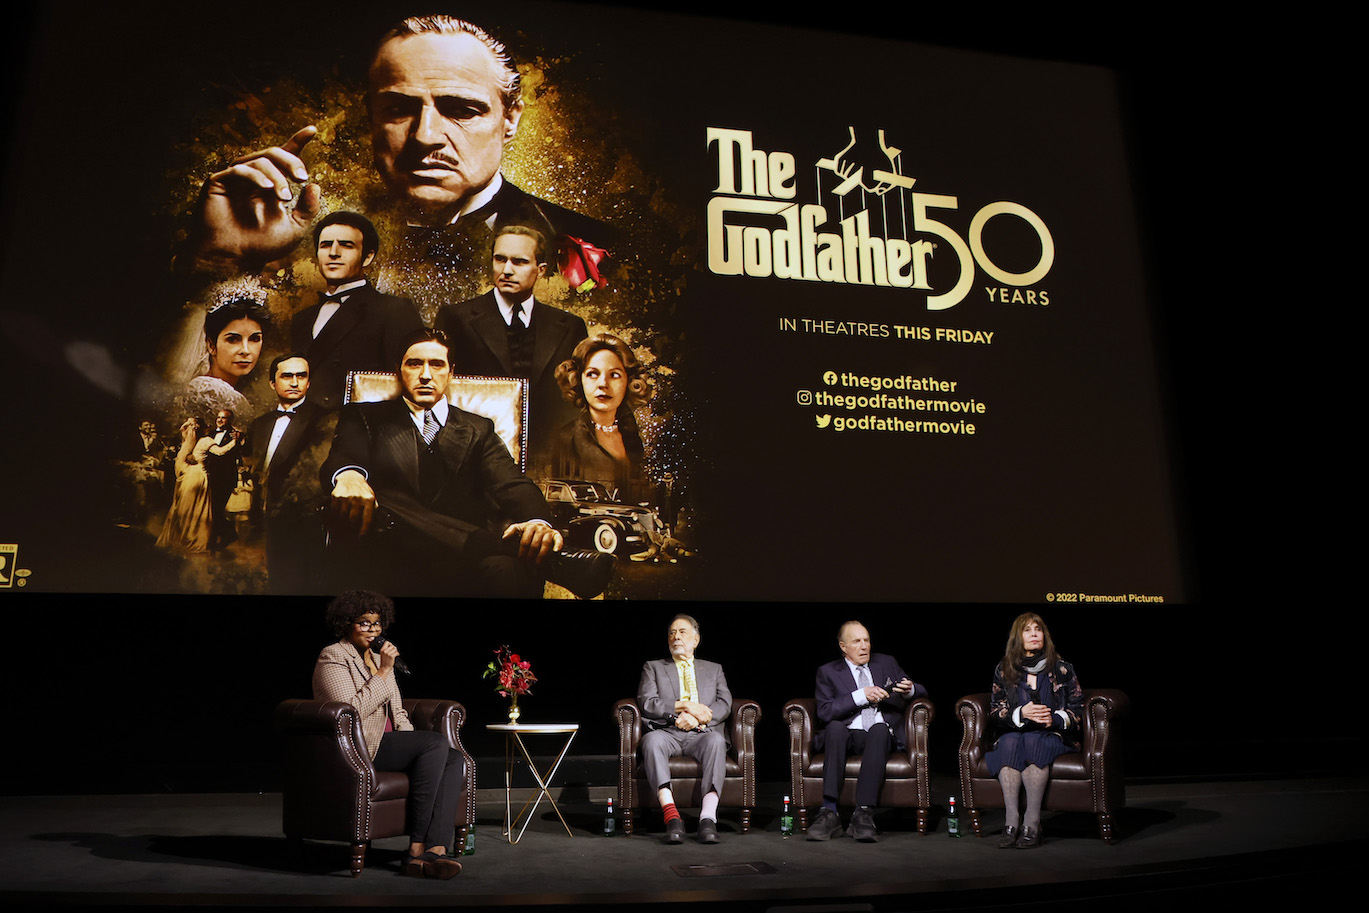 Francis Ford Coppola appears at LA event commemorating the 50th anniversary  of The Godfather